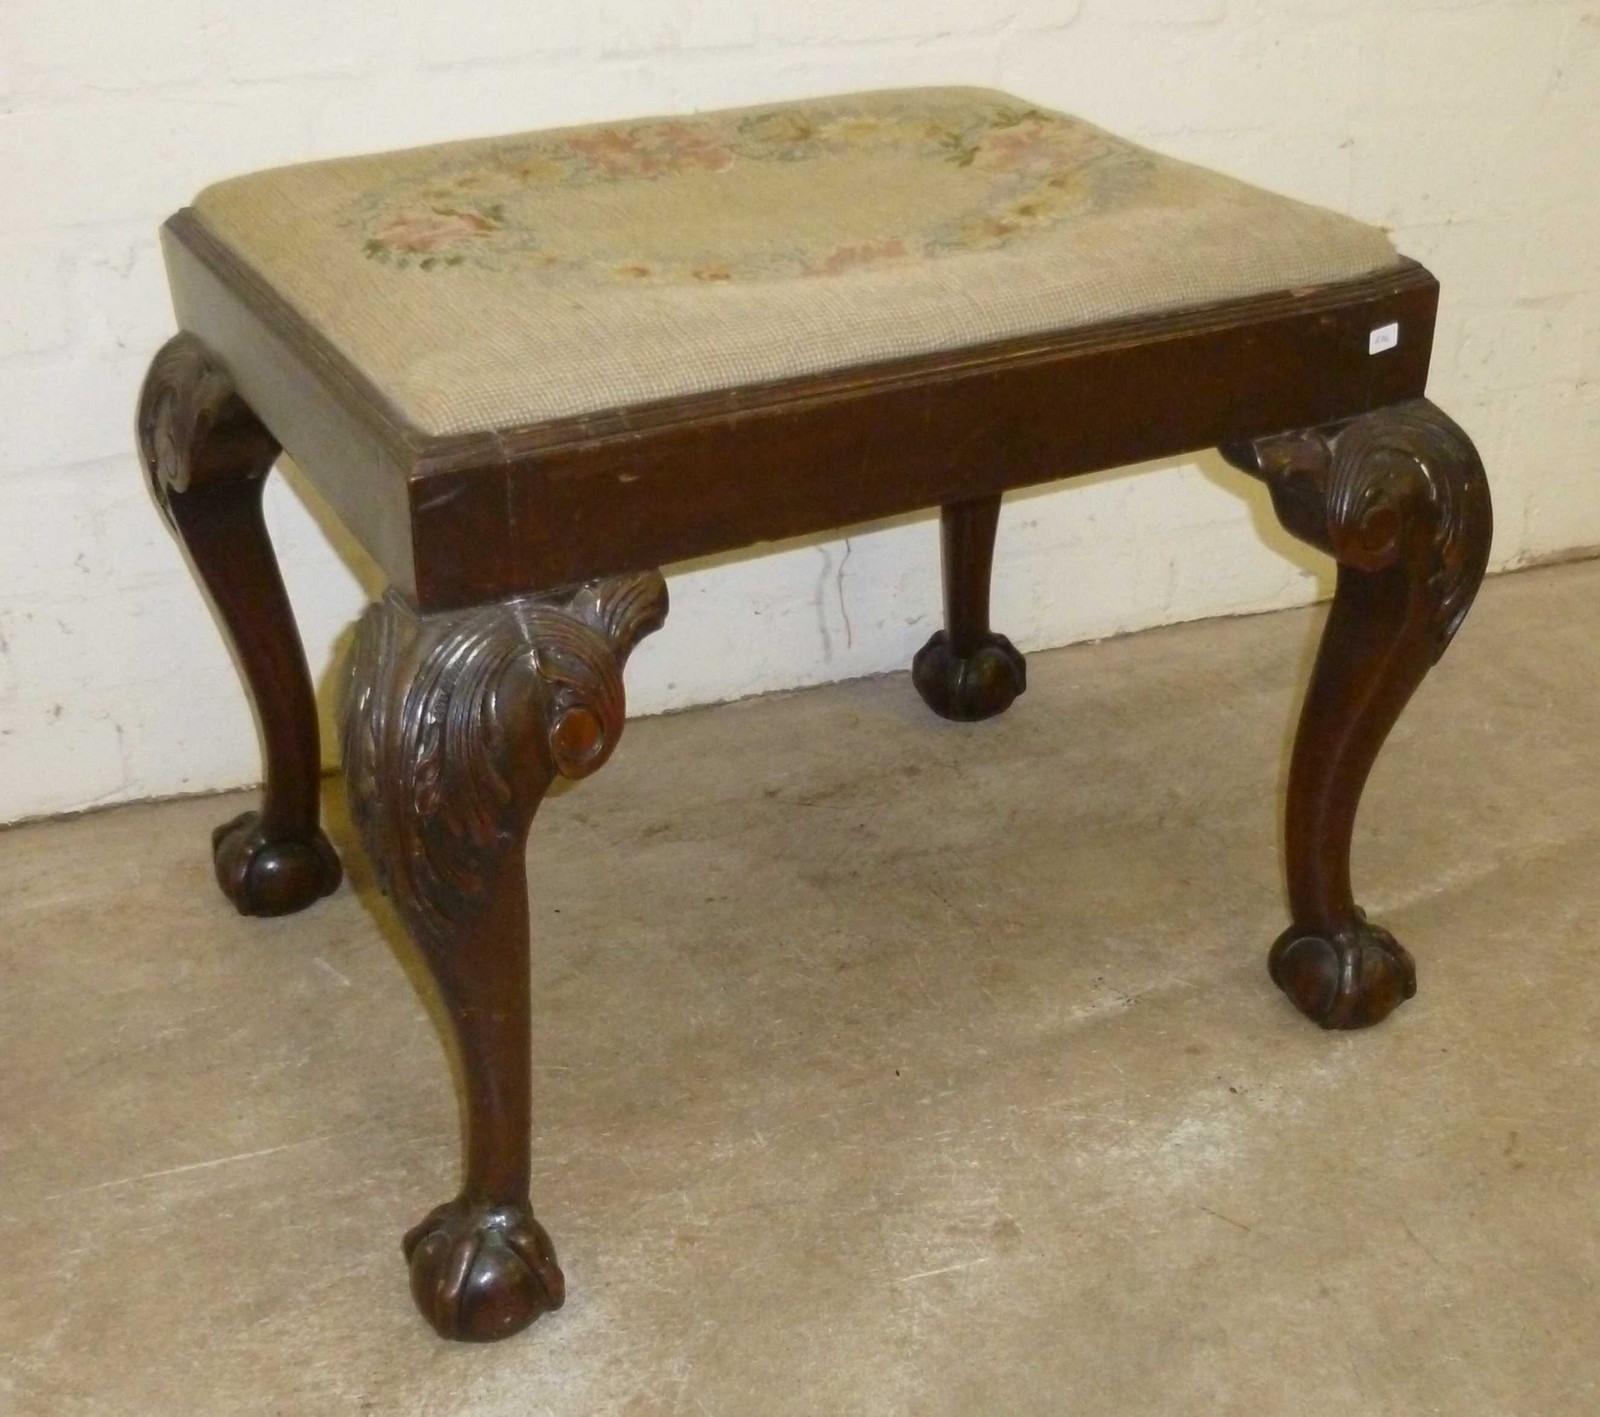 Tapestry topped stool with carved ball and claw legs